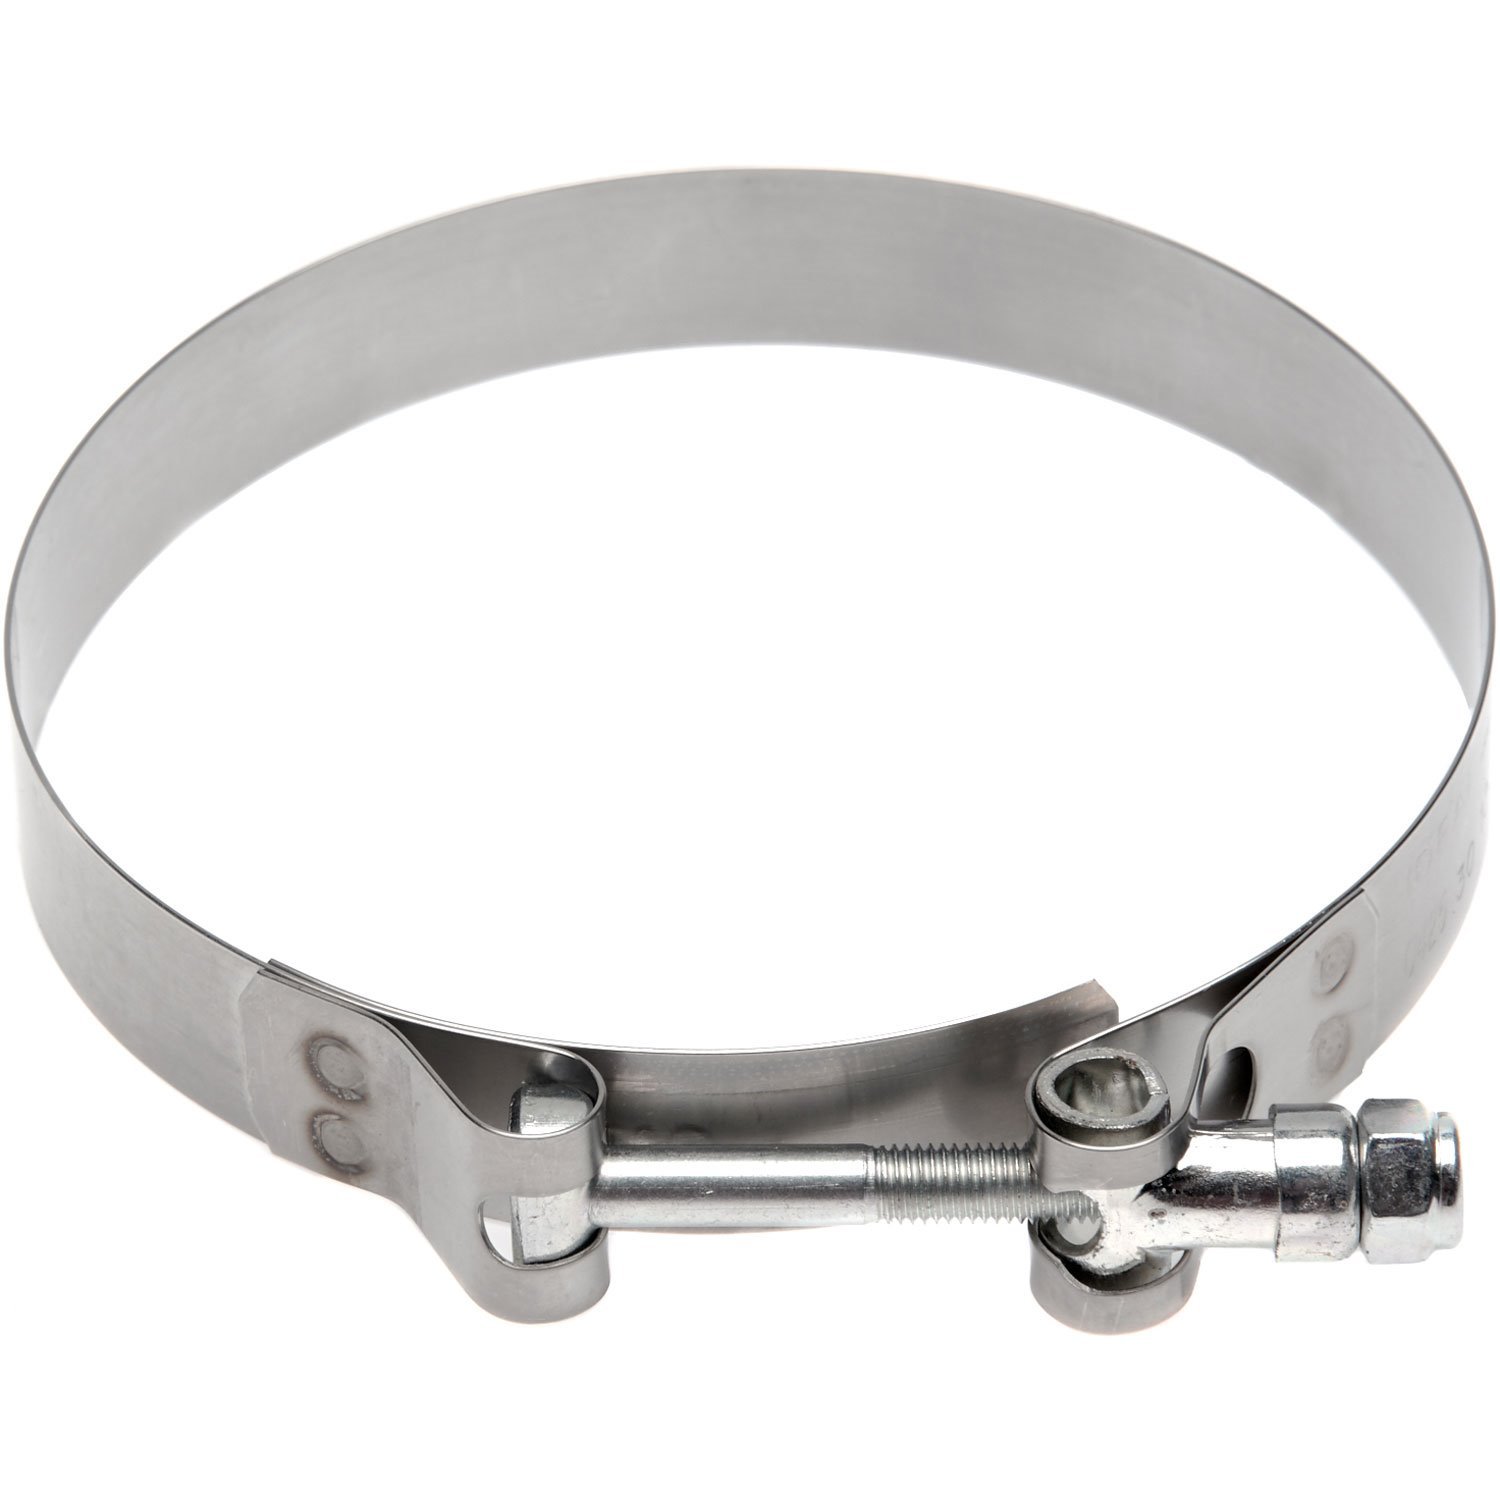 T-Bolt Hose Clamp [3.938 in. to 3.625 in. Outside Diameter]